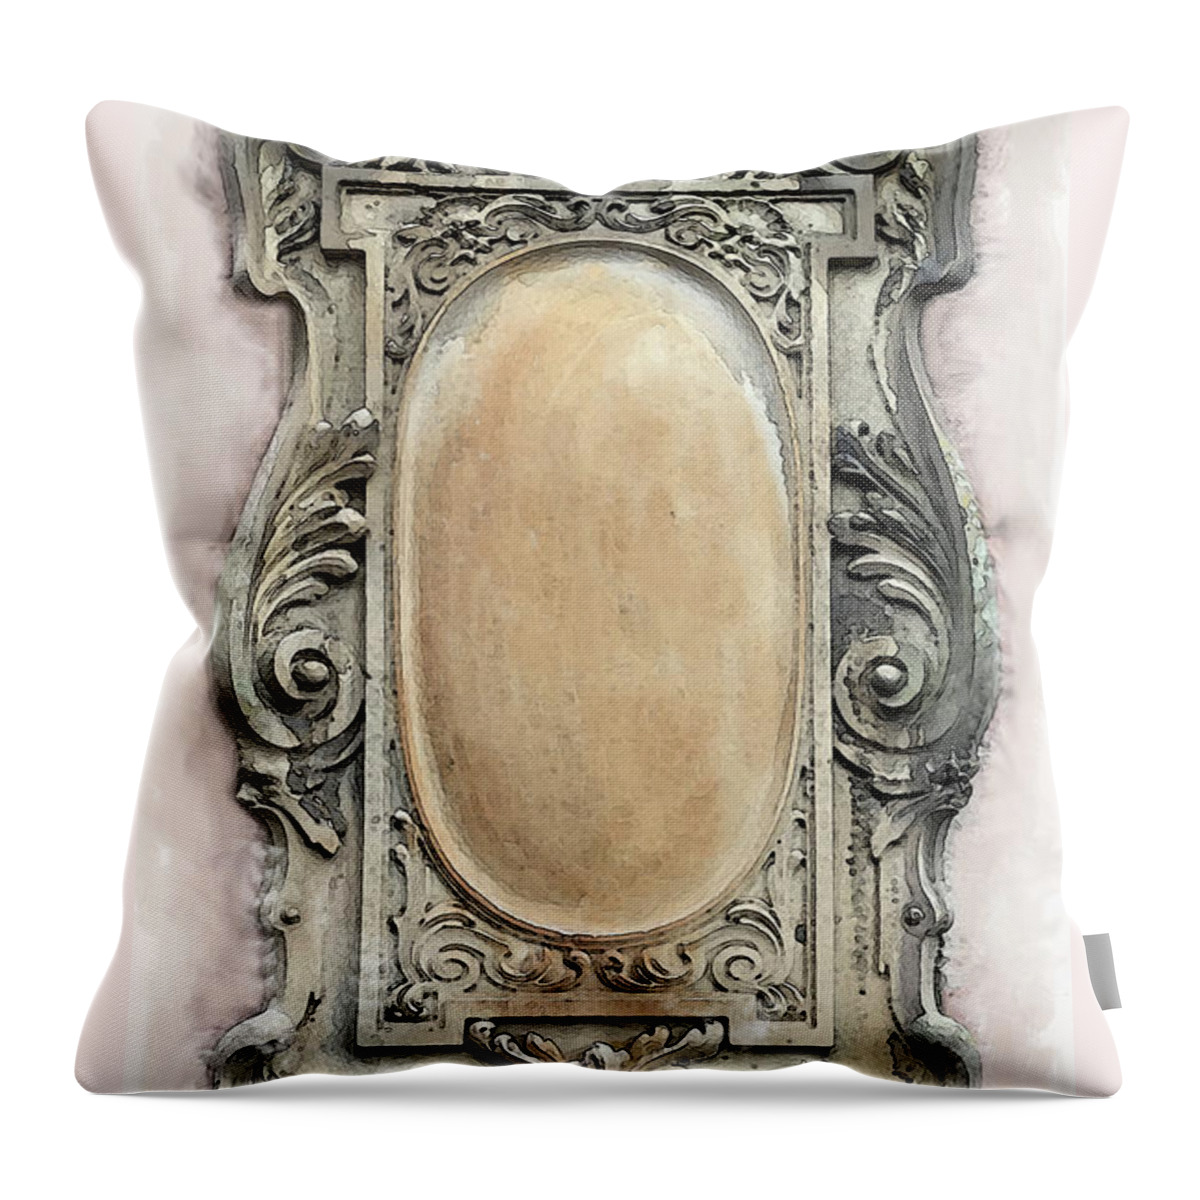 Heidelberg Castle Throw Pillow featuring the digital art Proclamation by Gina Harrison